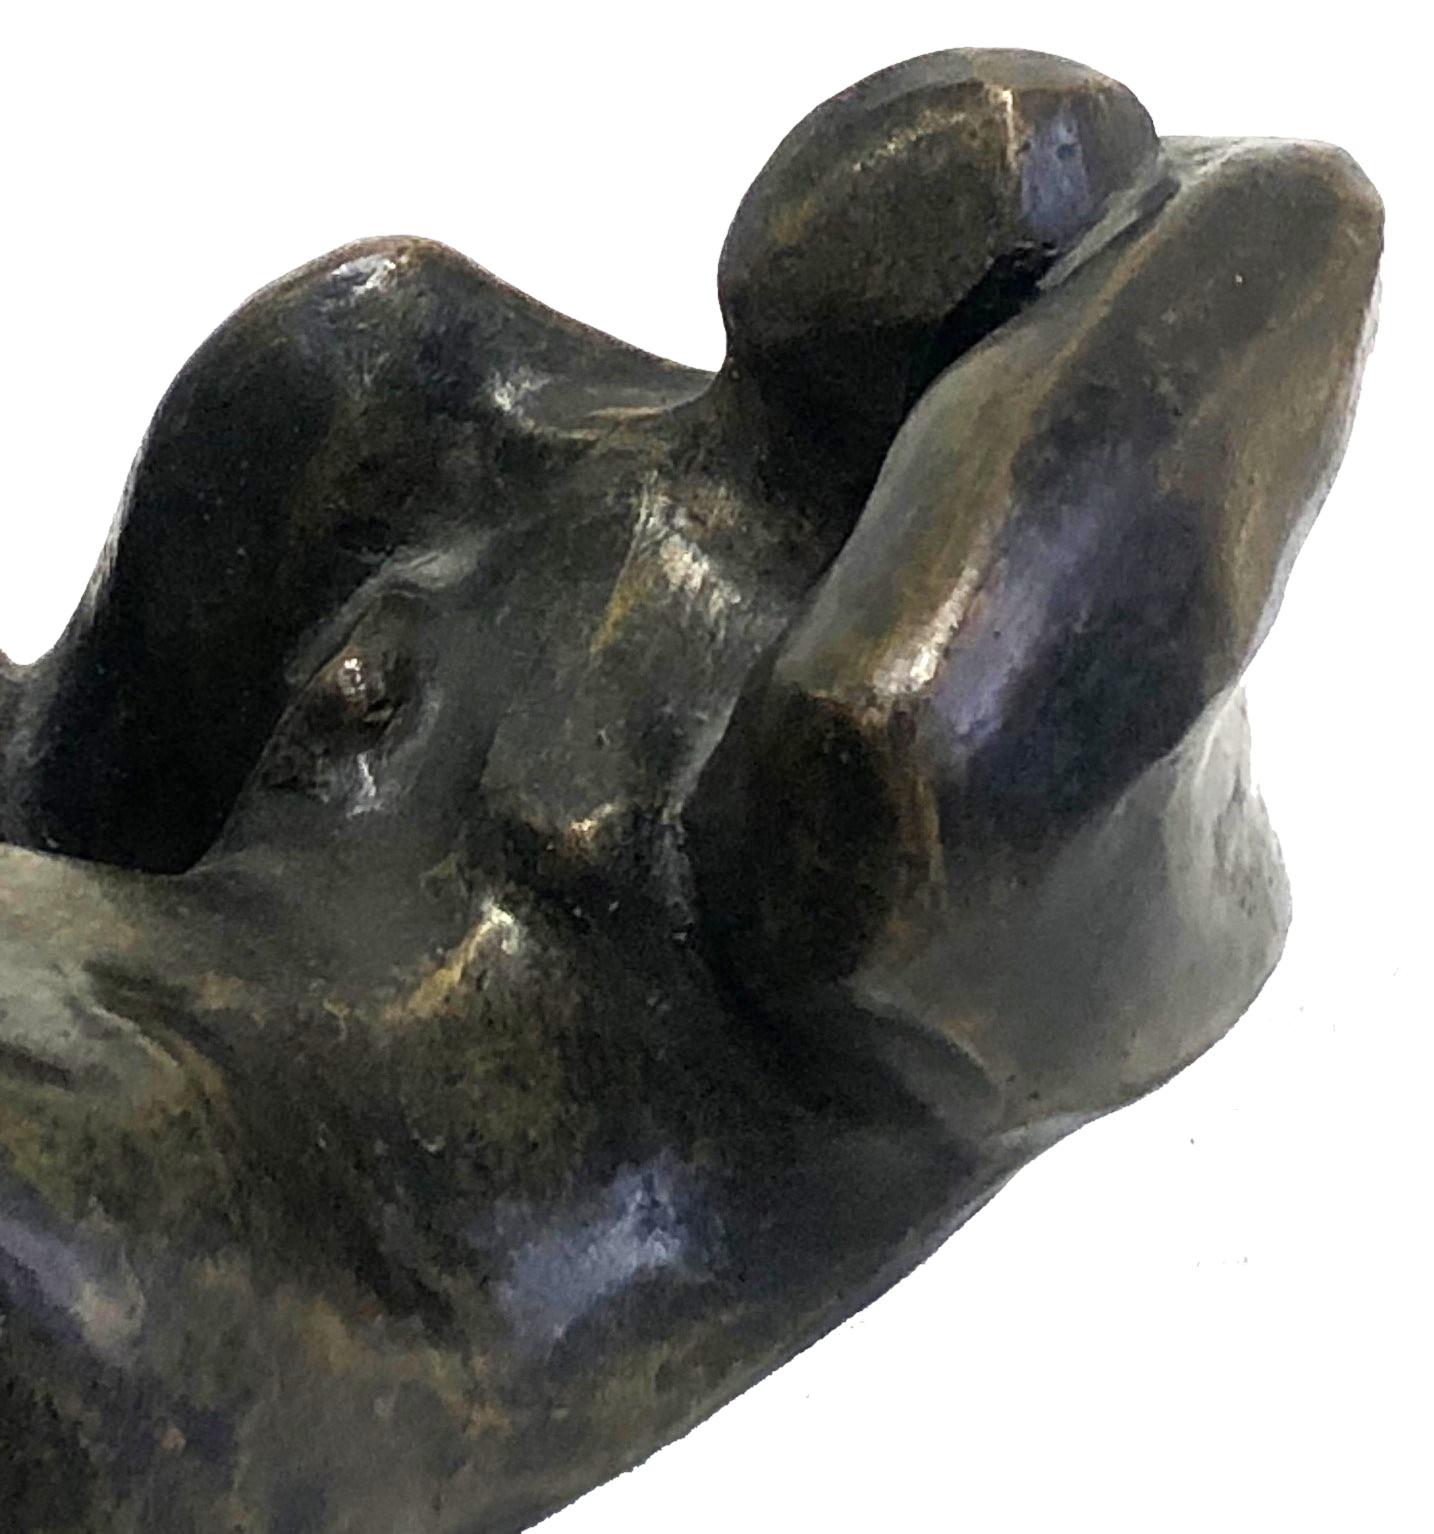 Andrée Hochar Fattal 
Forbidden Fruit
Modernist Patinated-Bronze Sculpture
XX Century

DIMENSIONS
Height: 4.75 inches                  
Width: 8.25 inches                   
Depth: 5.75 inches

ANDREE HOCHAR FATTAL is a sculptor who was born in